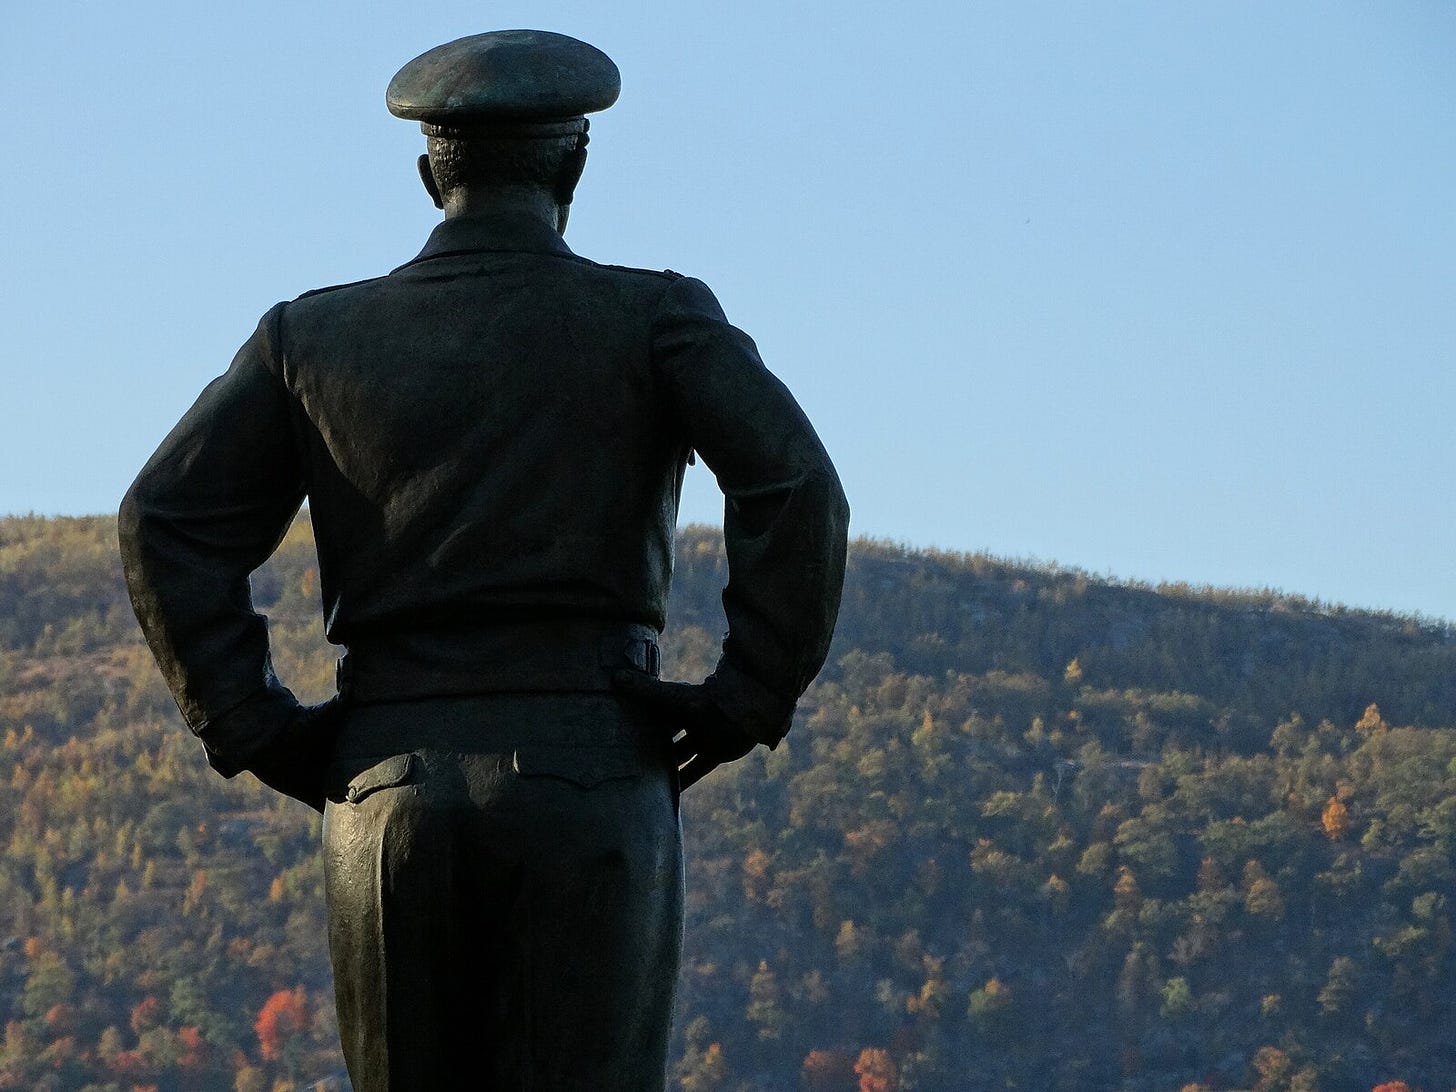 Statue of Dwight Eisenhower at West Point